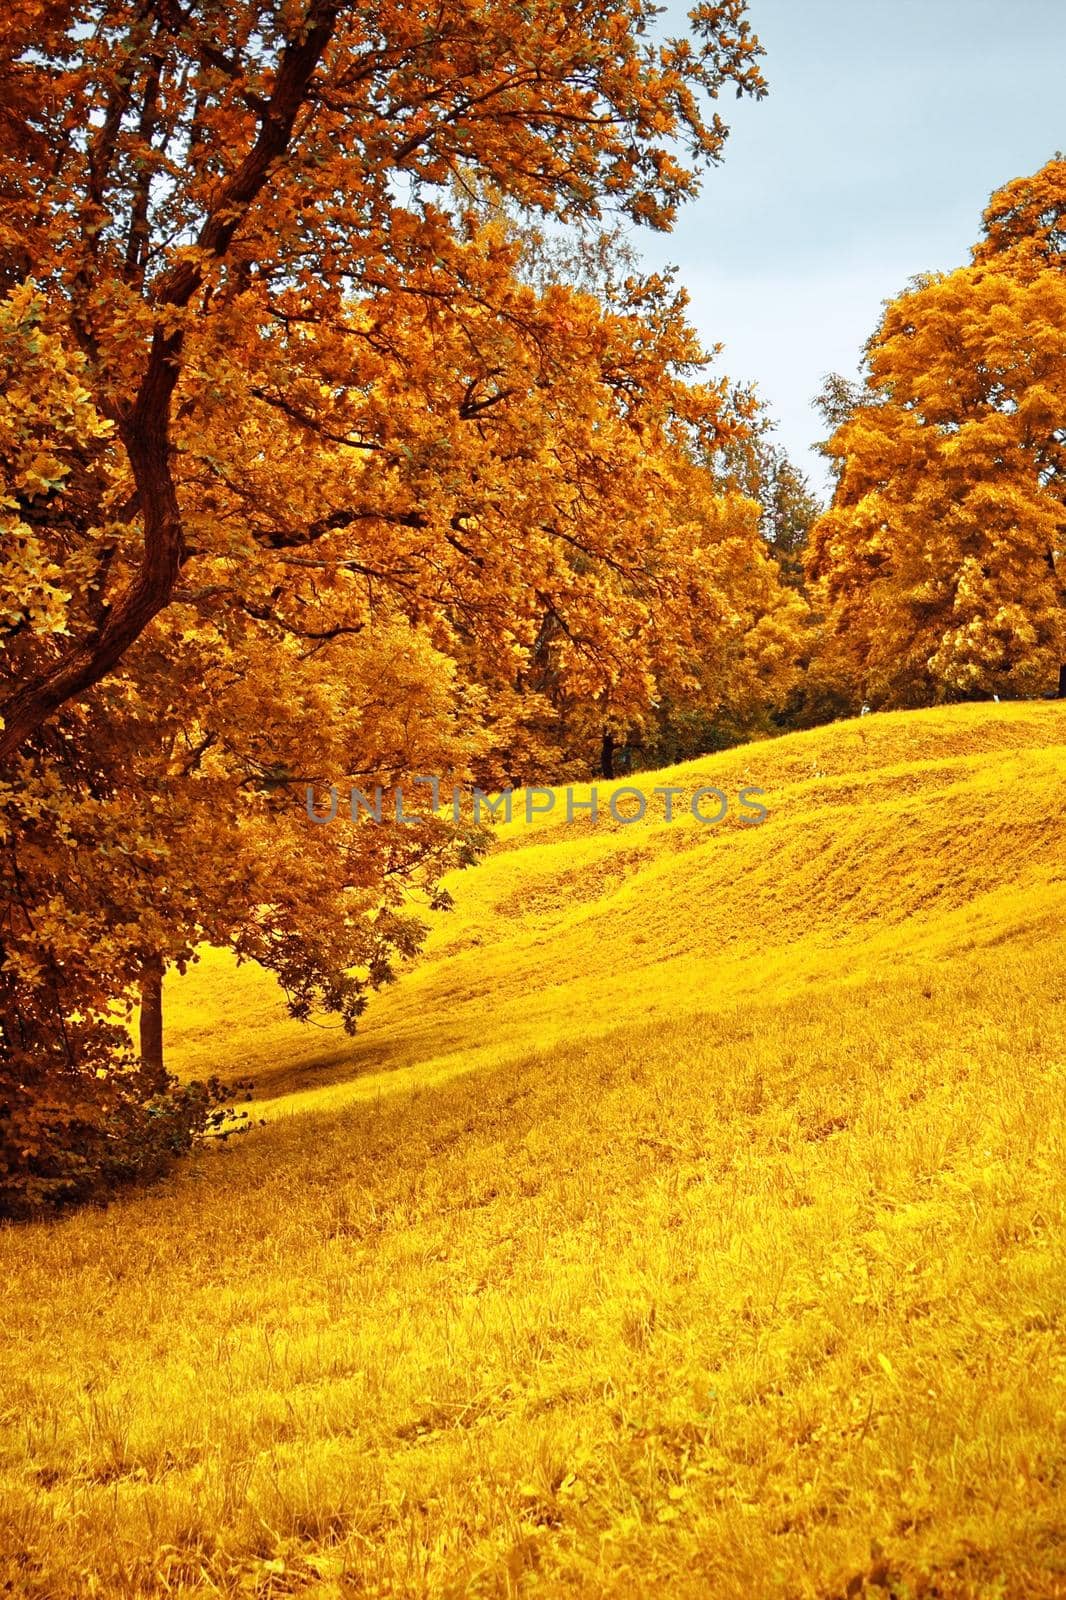 fall scenery, beauty of autumn - nature and environment concept, elegant visuals